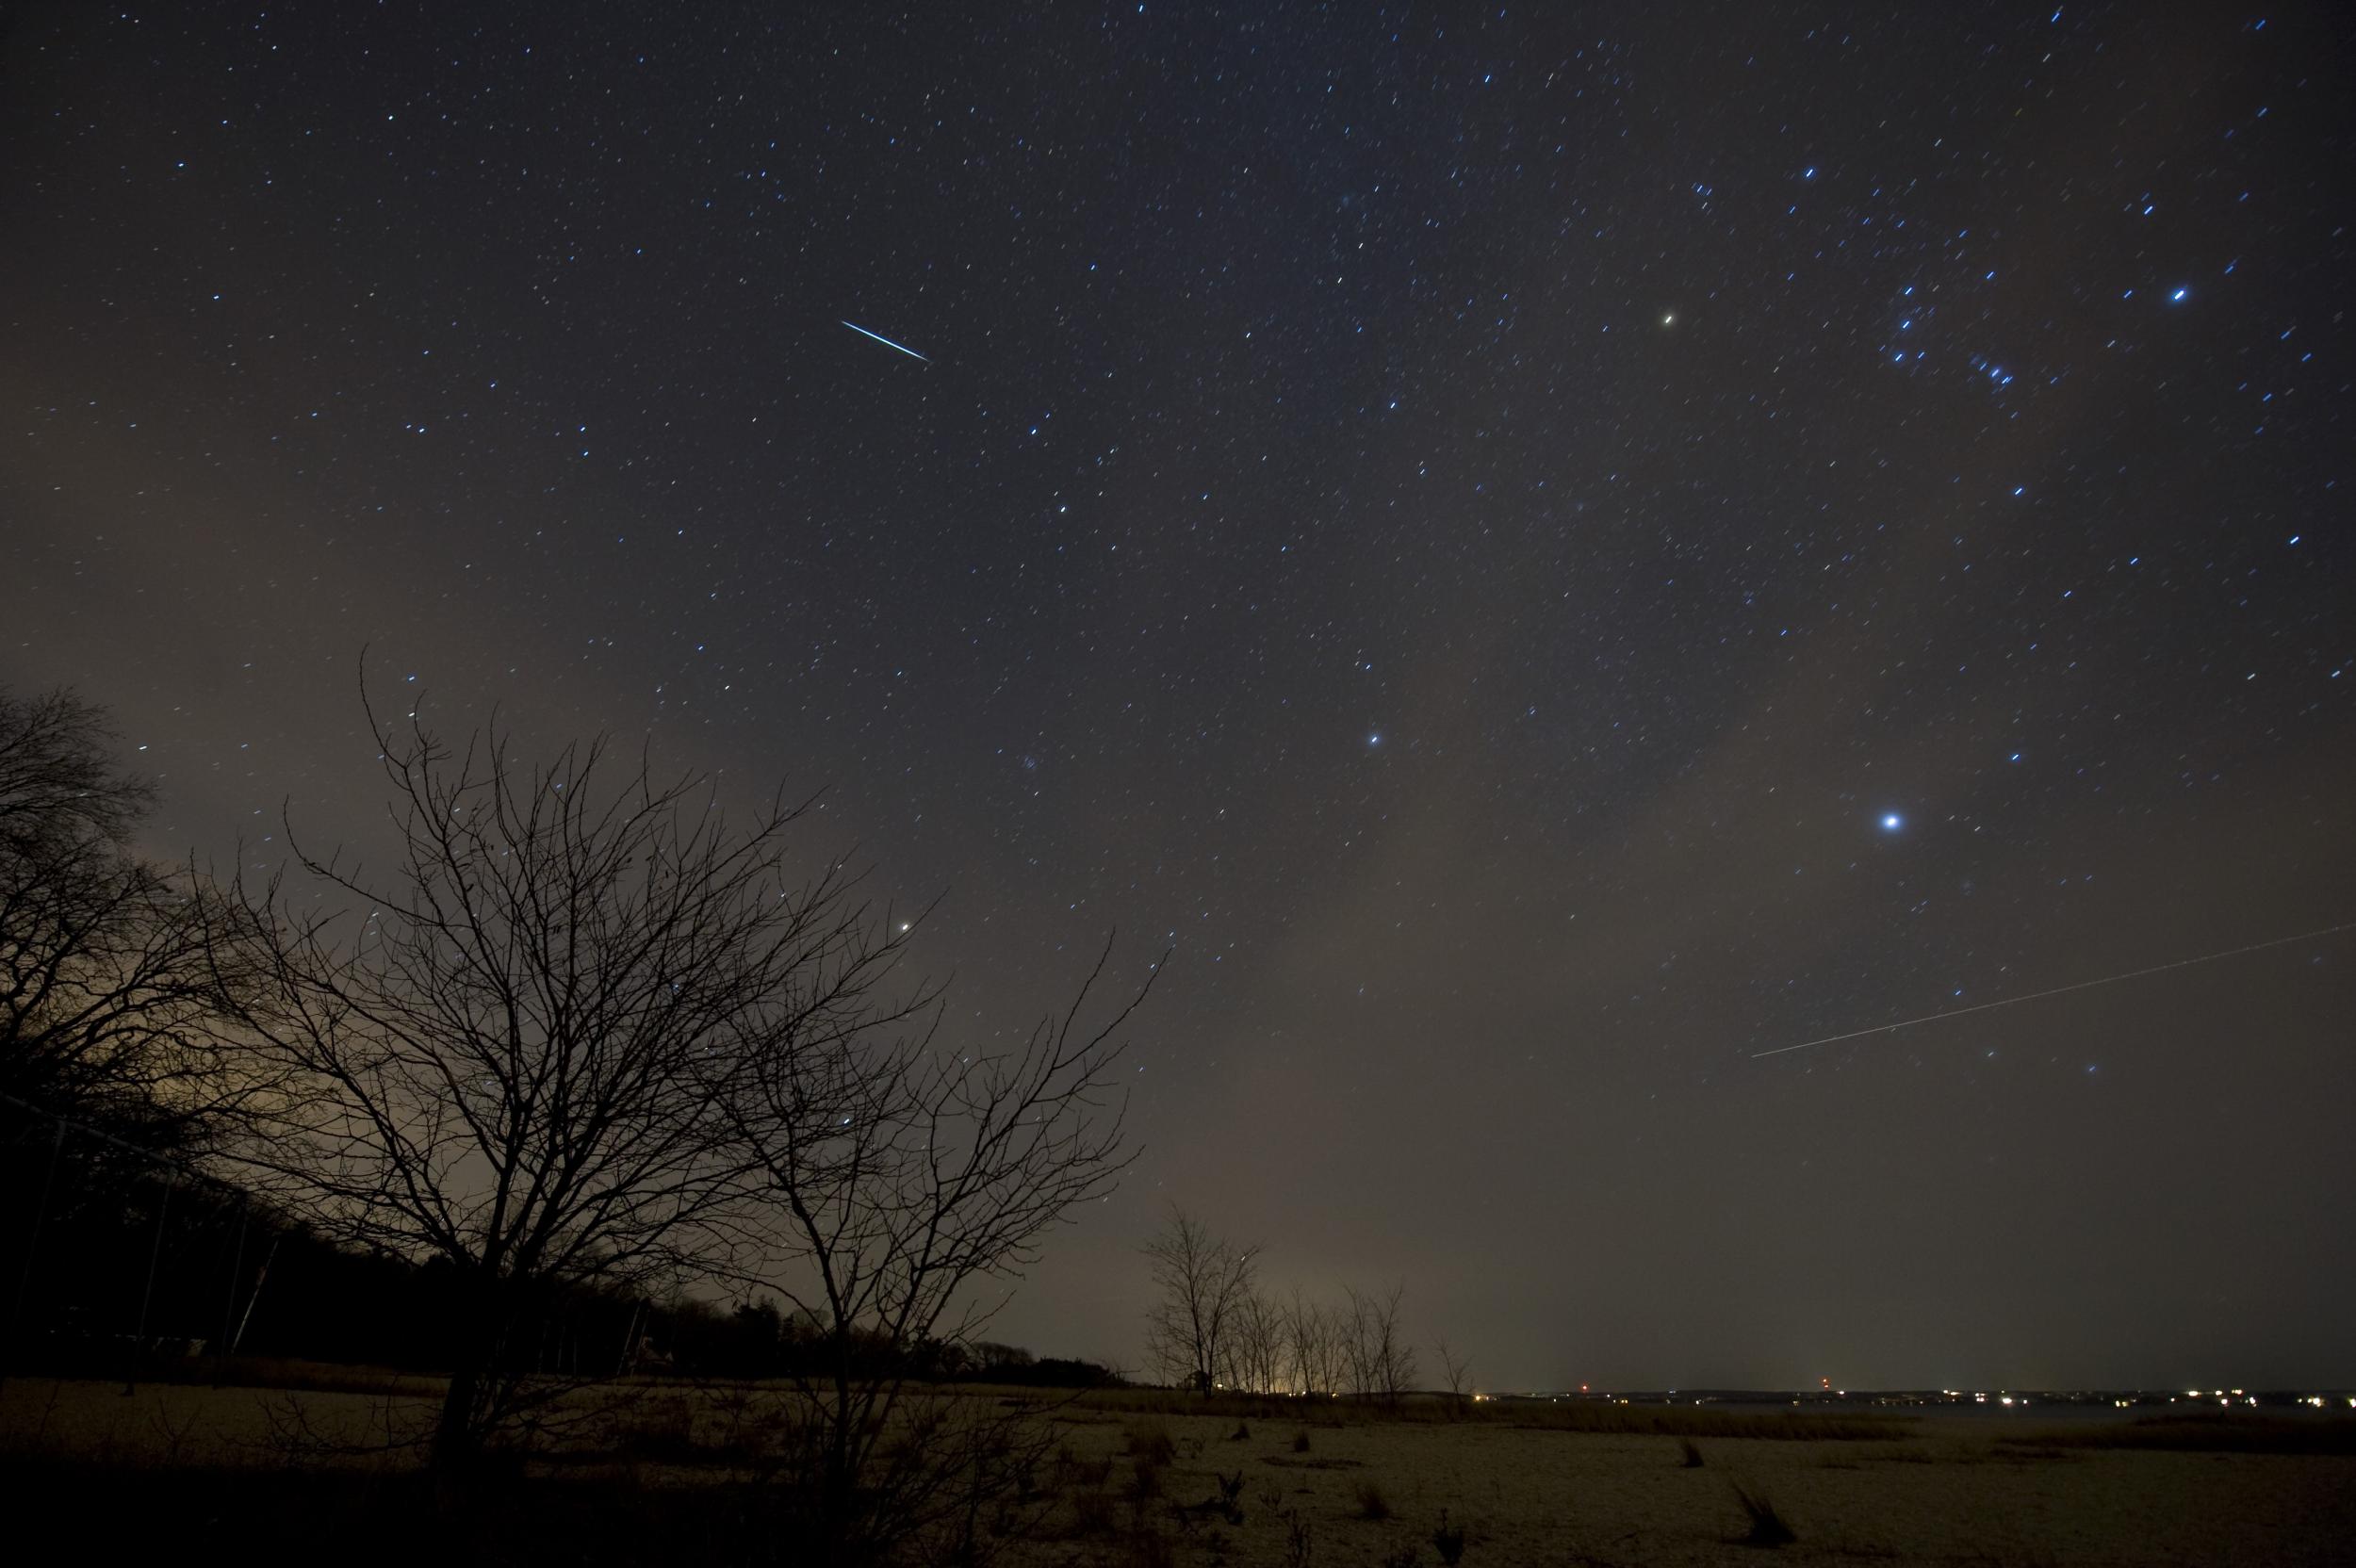 A Geminid meteor appears in the sky above New York during 2009's shower